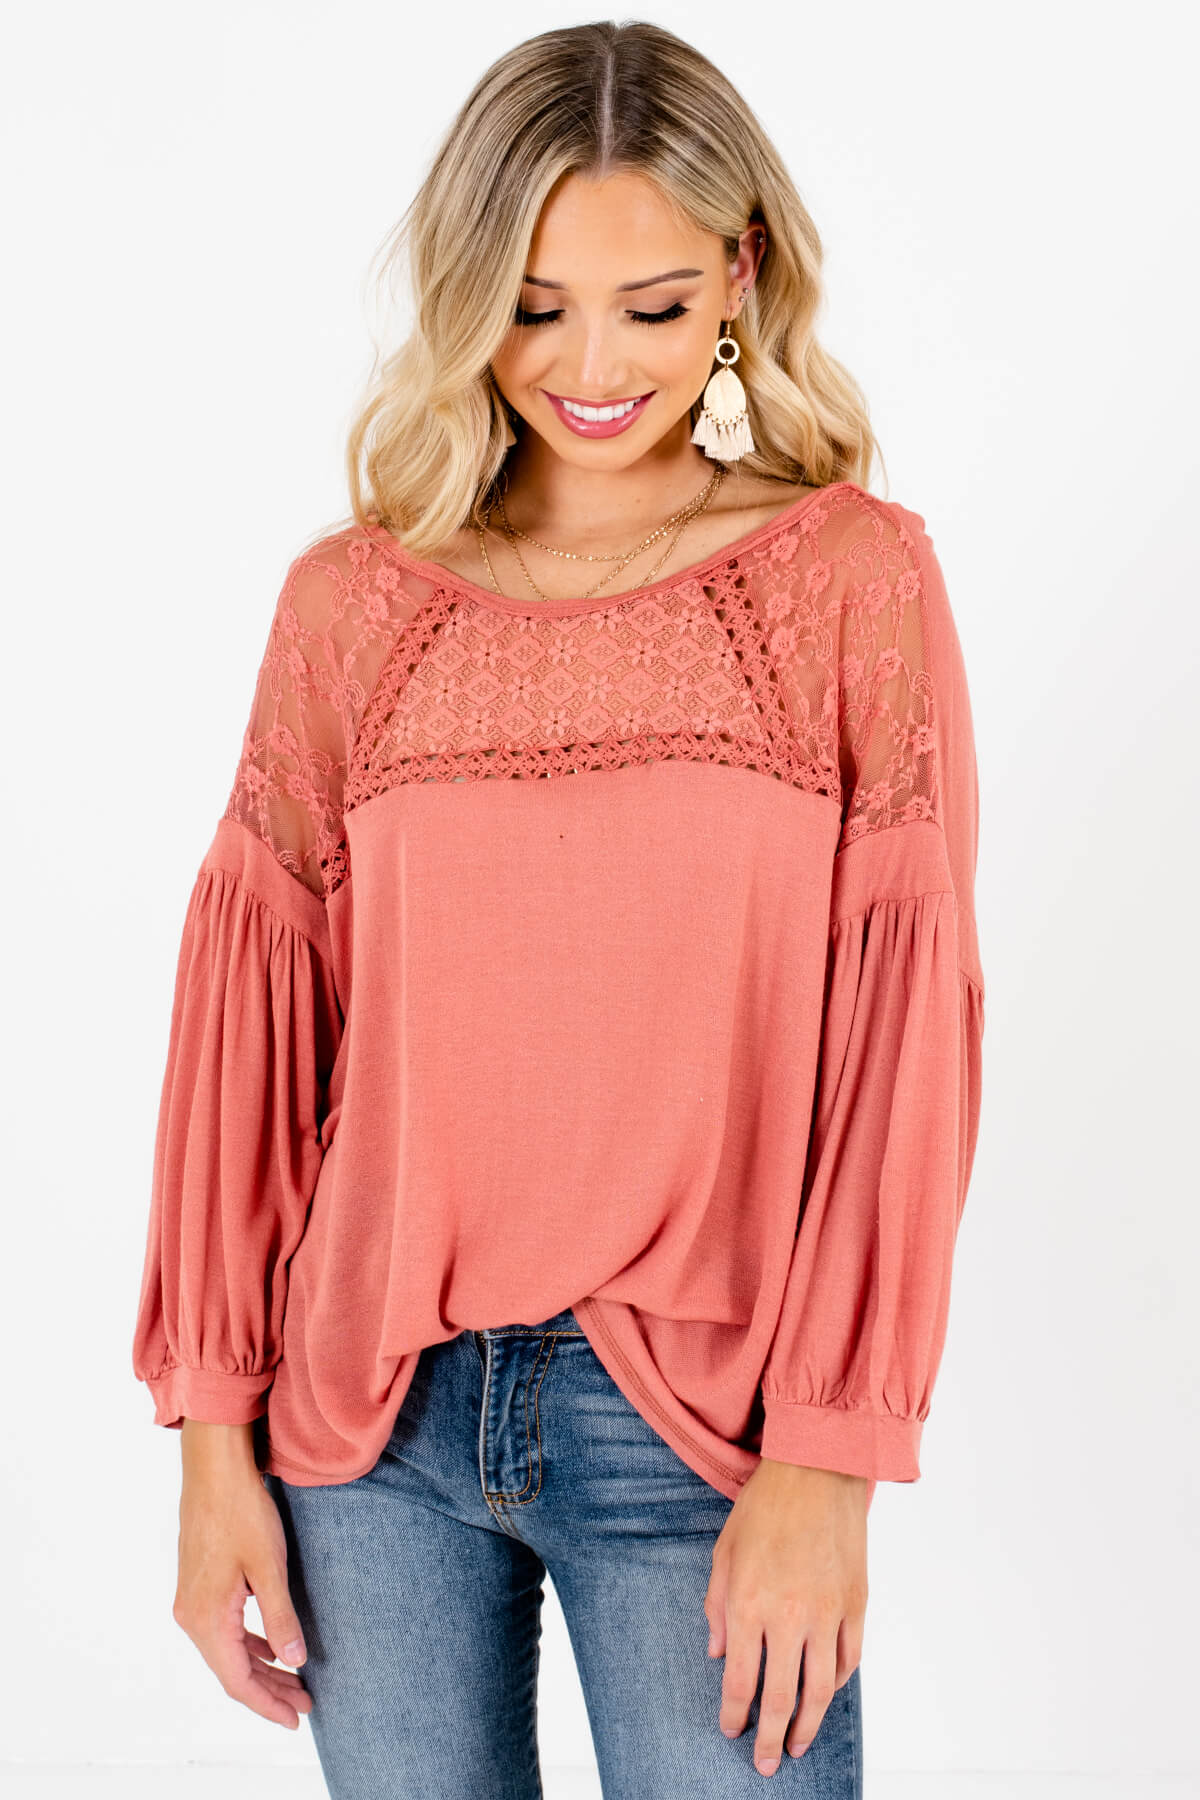 Pink Cute Everyday Outfit Boutique Tops for Women